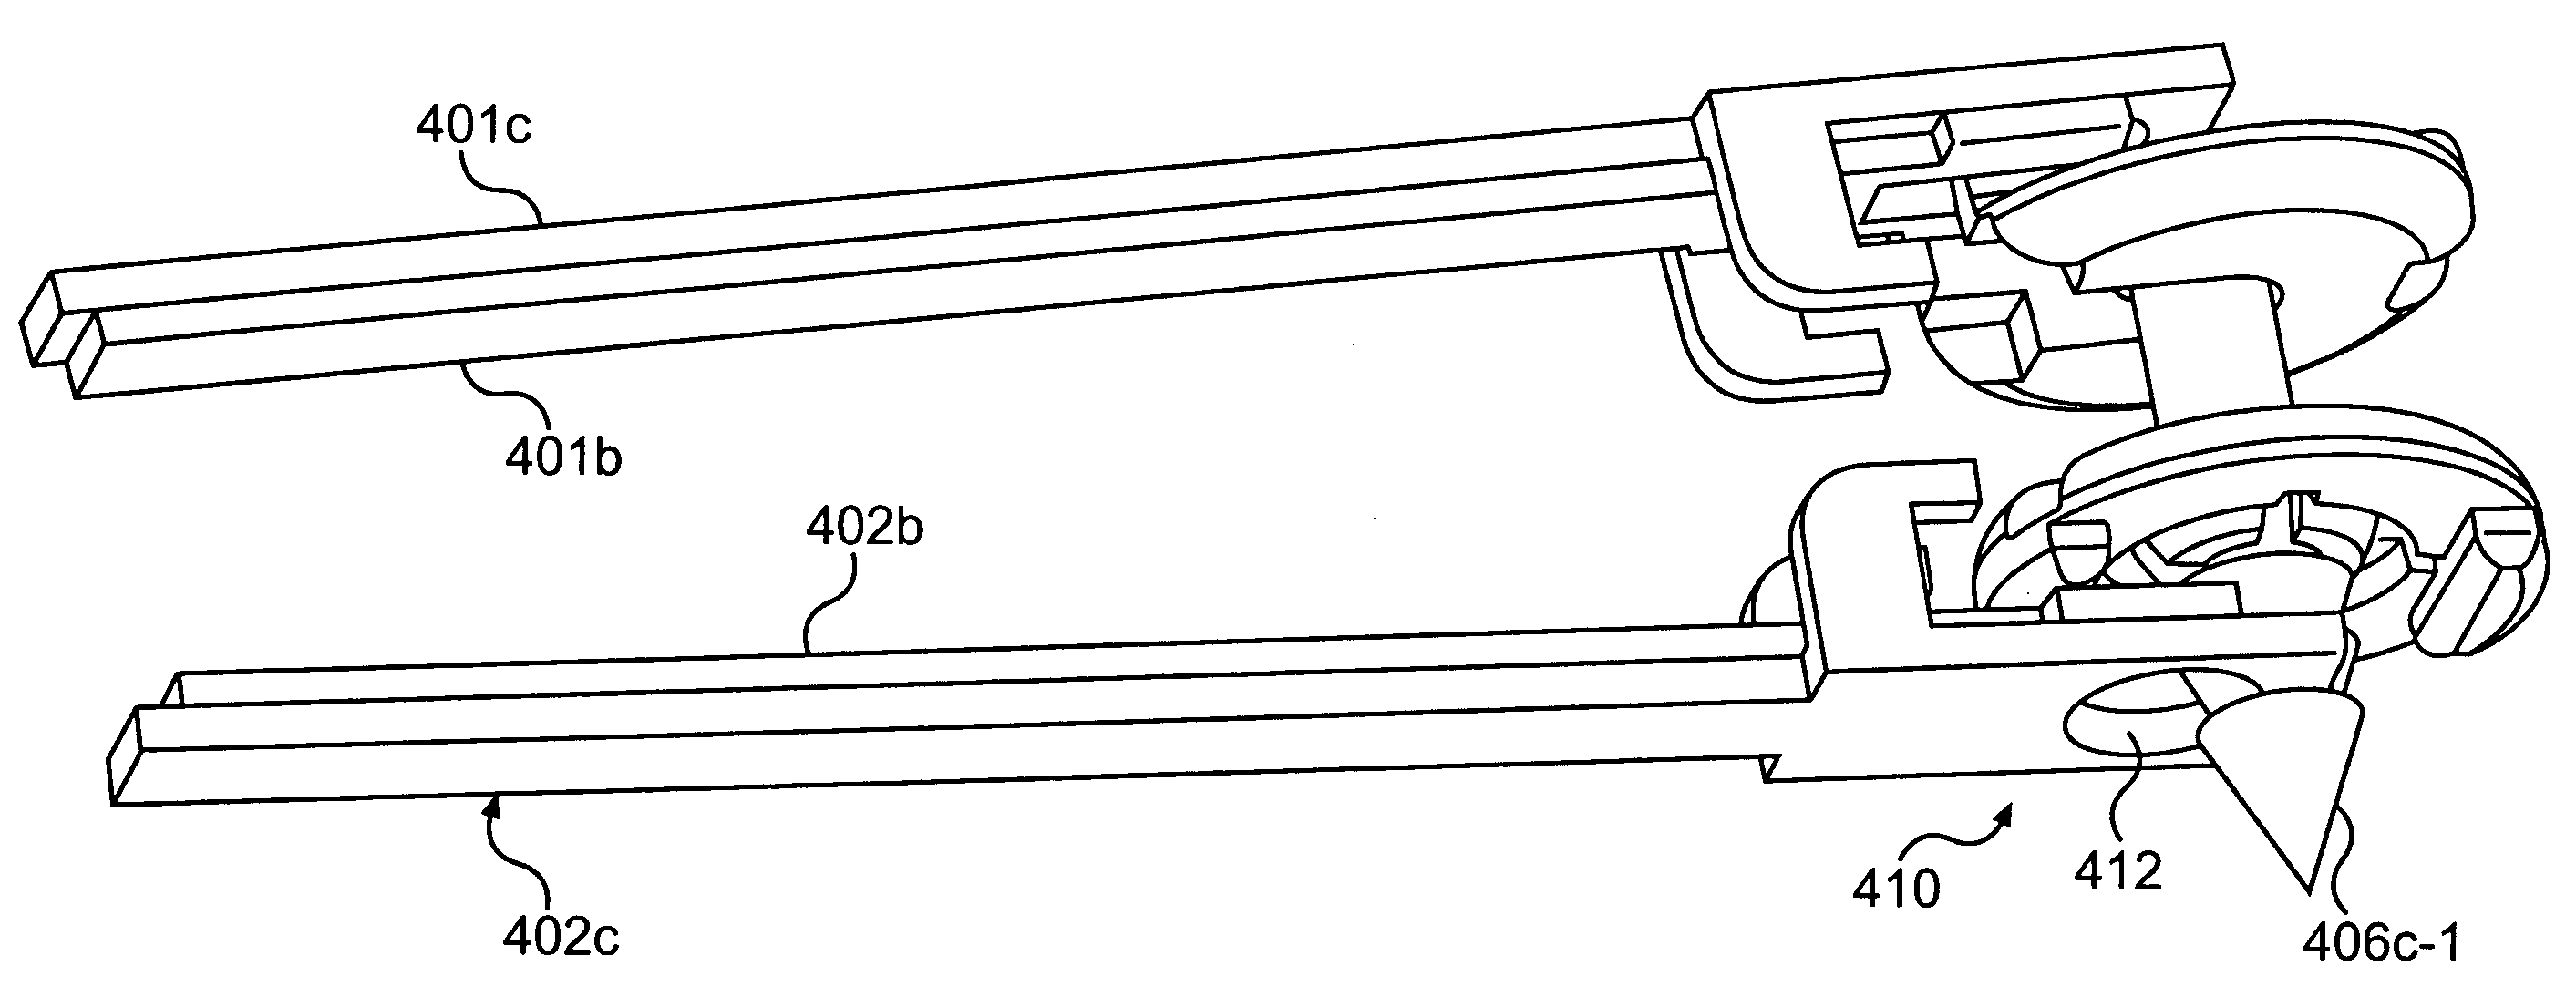 Surgical instrument for invagination and fundoplication